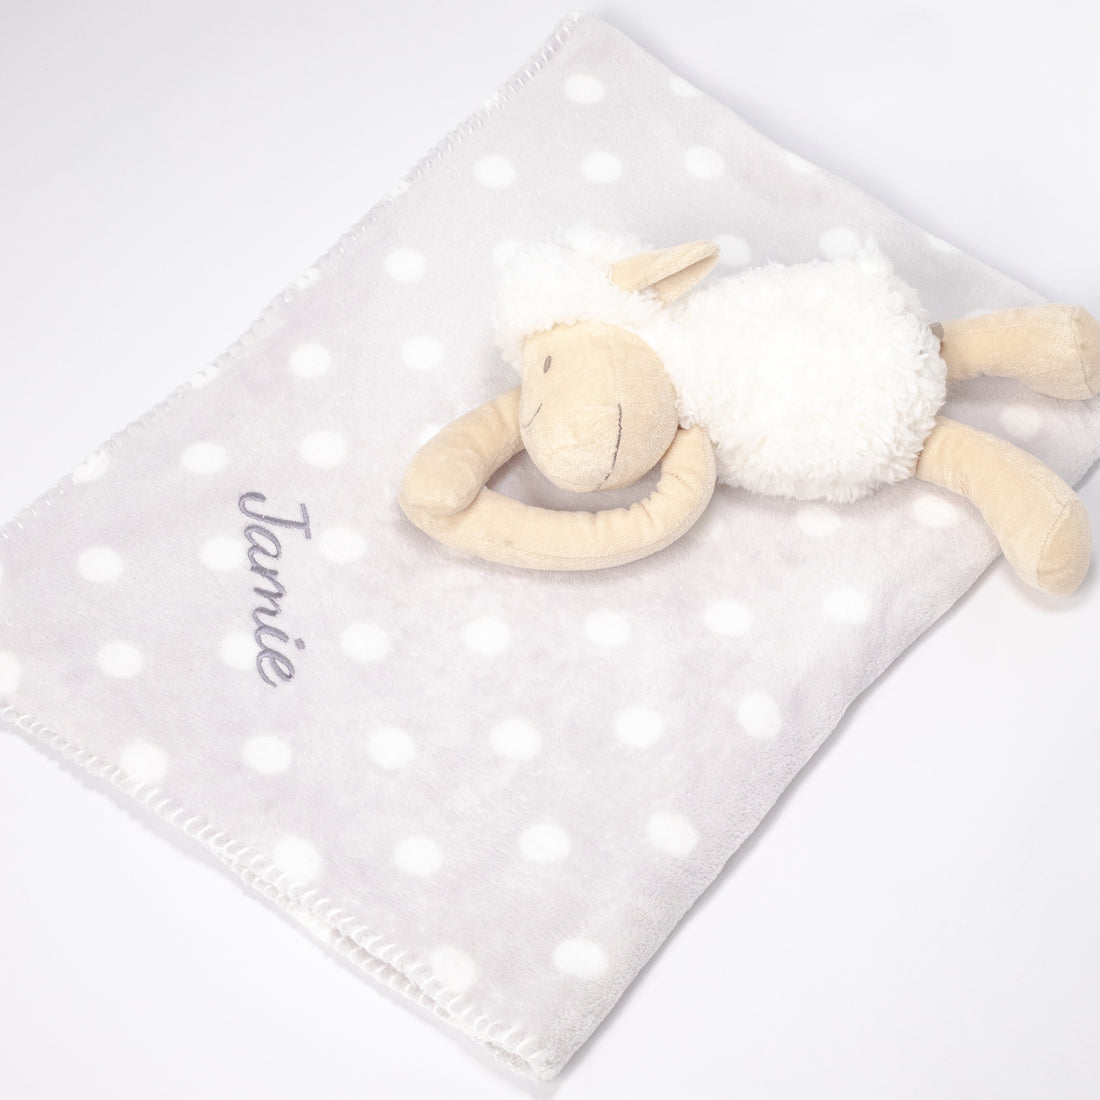 Sheep design blanket lying open flat with a plush sheep on top, showcasing the embroidered baby&